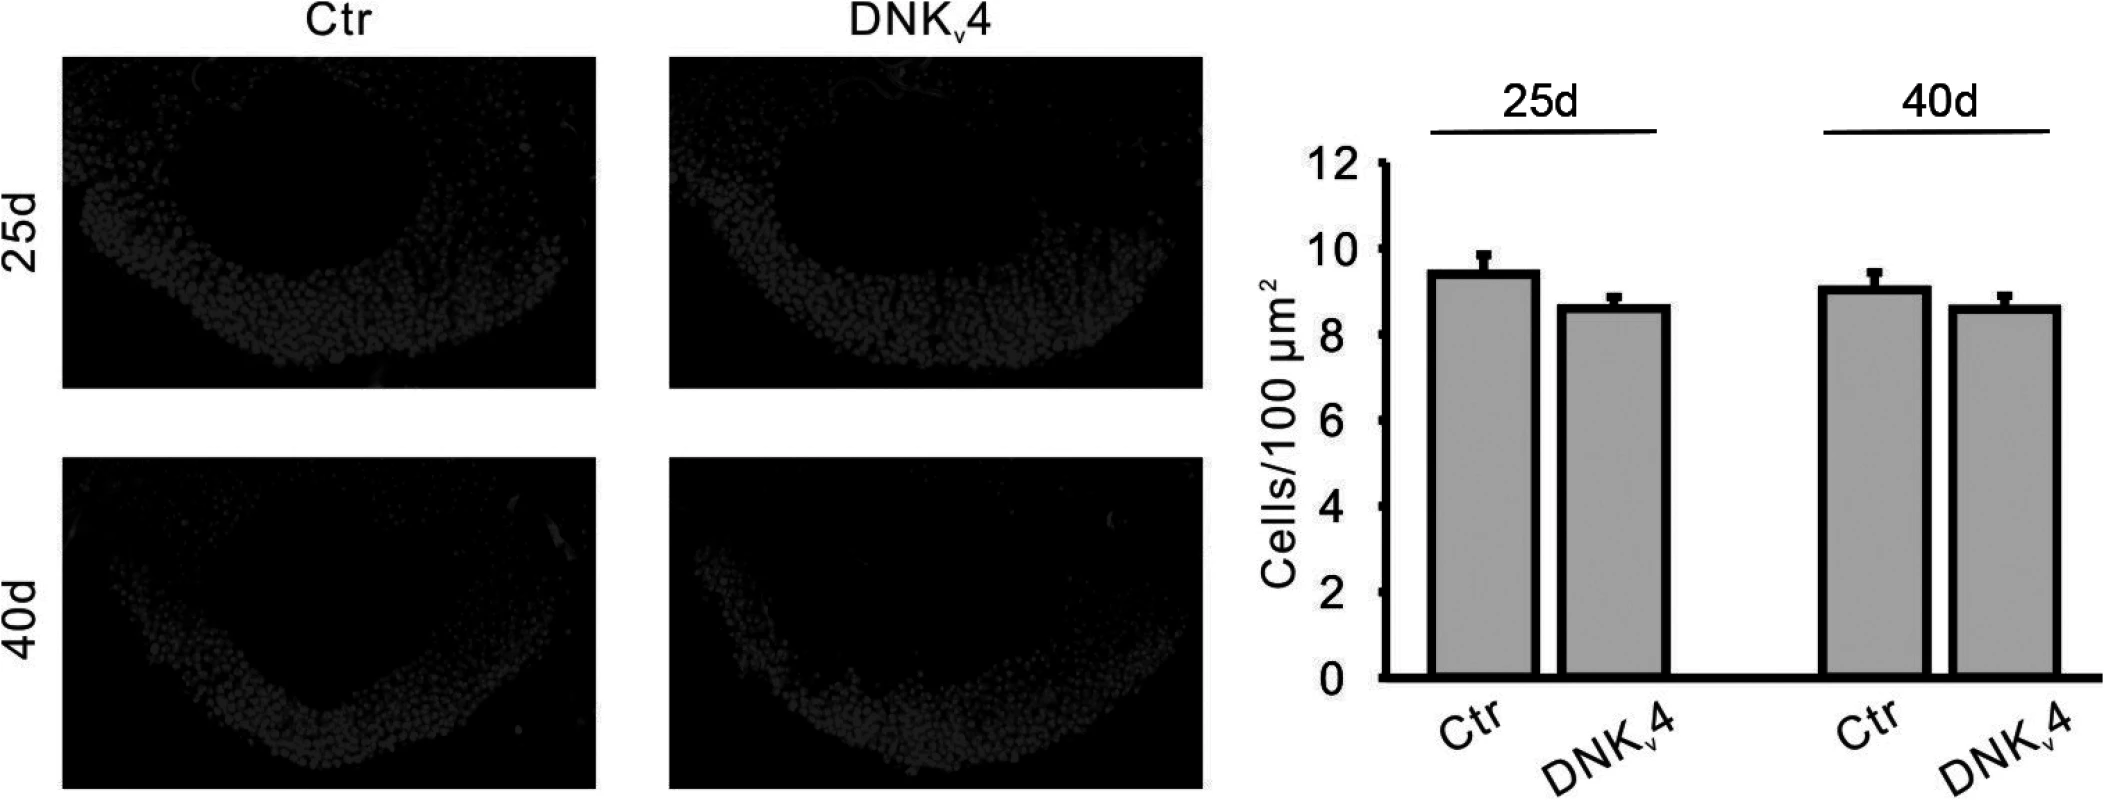 No significant MB cell loss is found in the DNK<sub>v</sub>4 transgenic line.